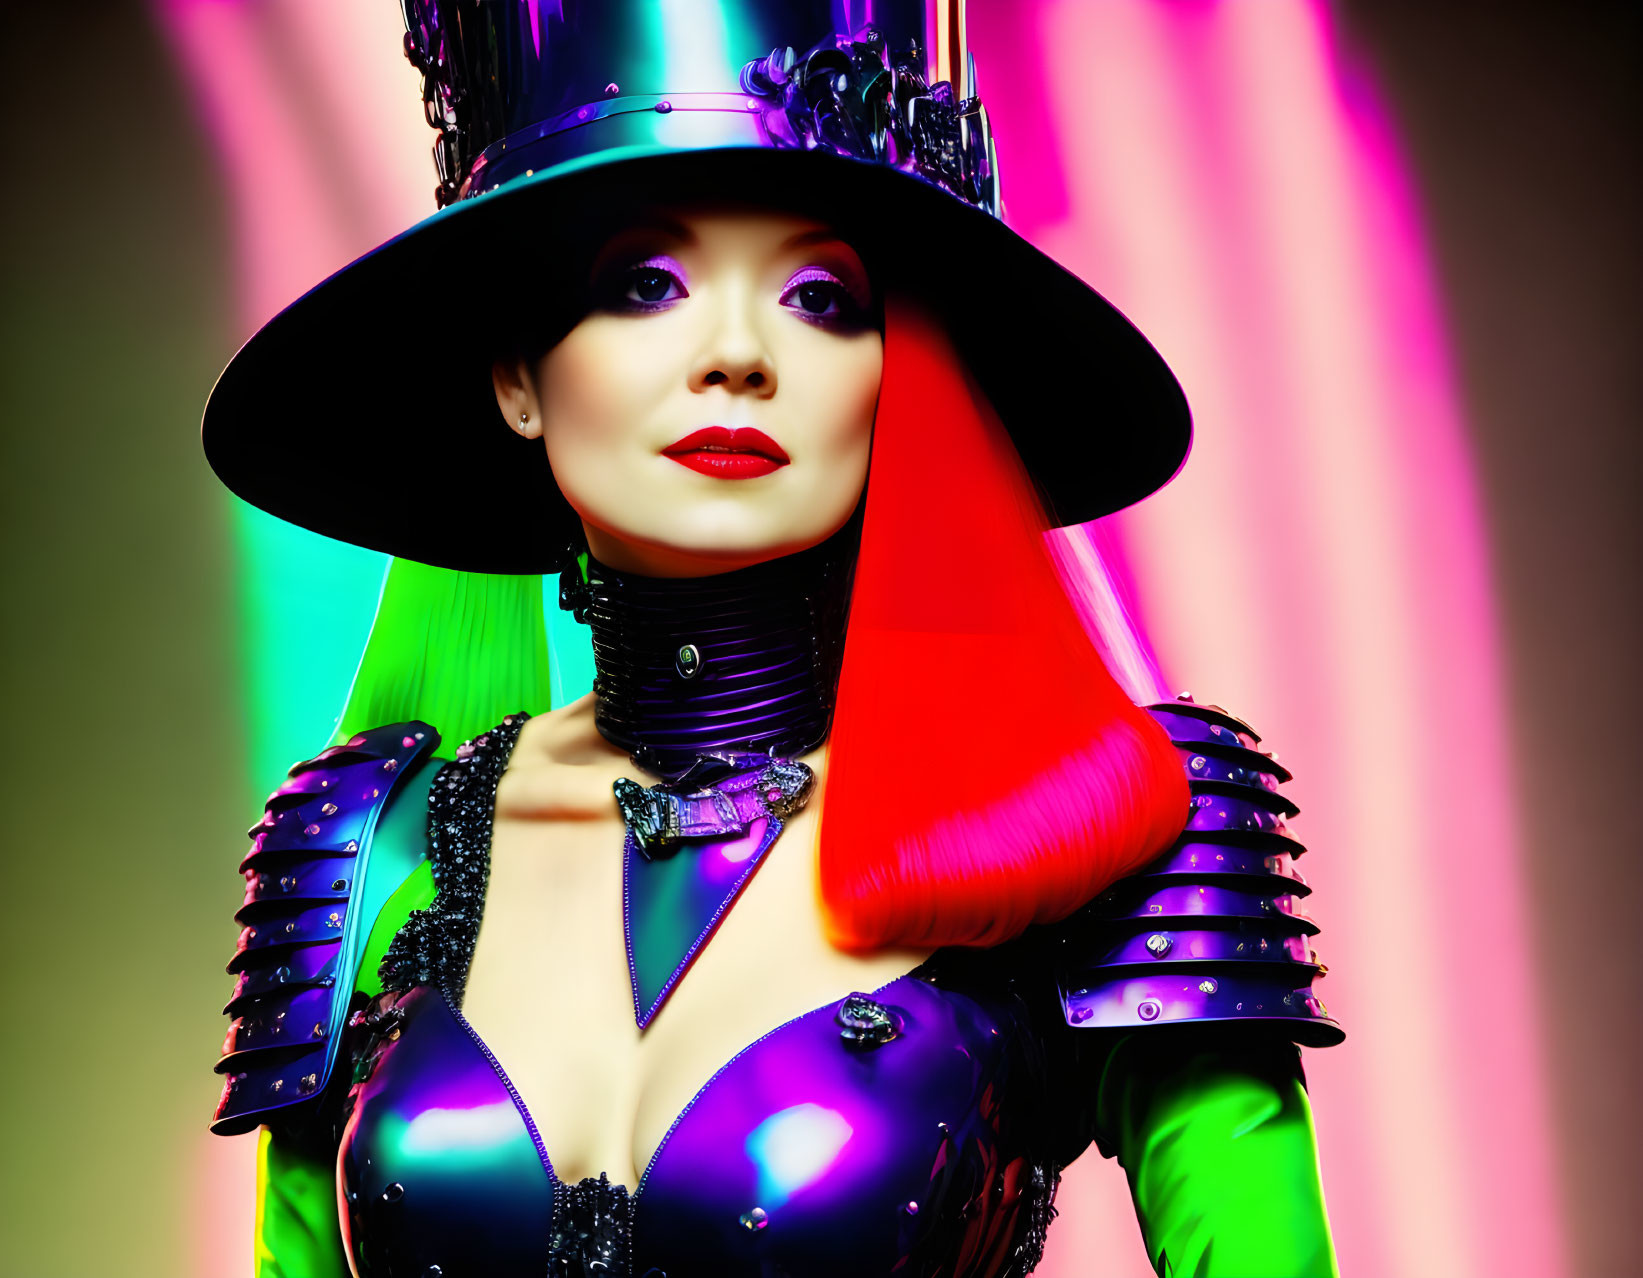 Extravagant costume and top hat with neon lights background